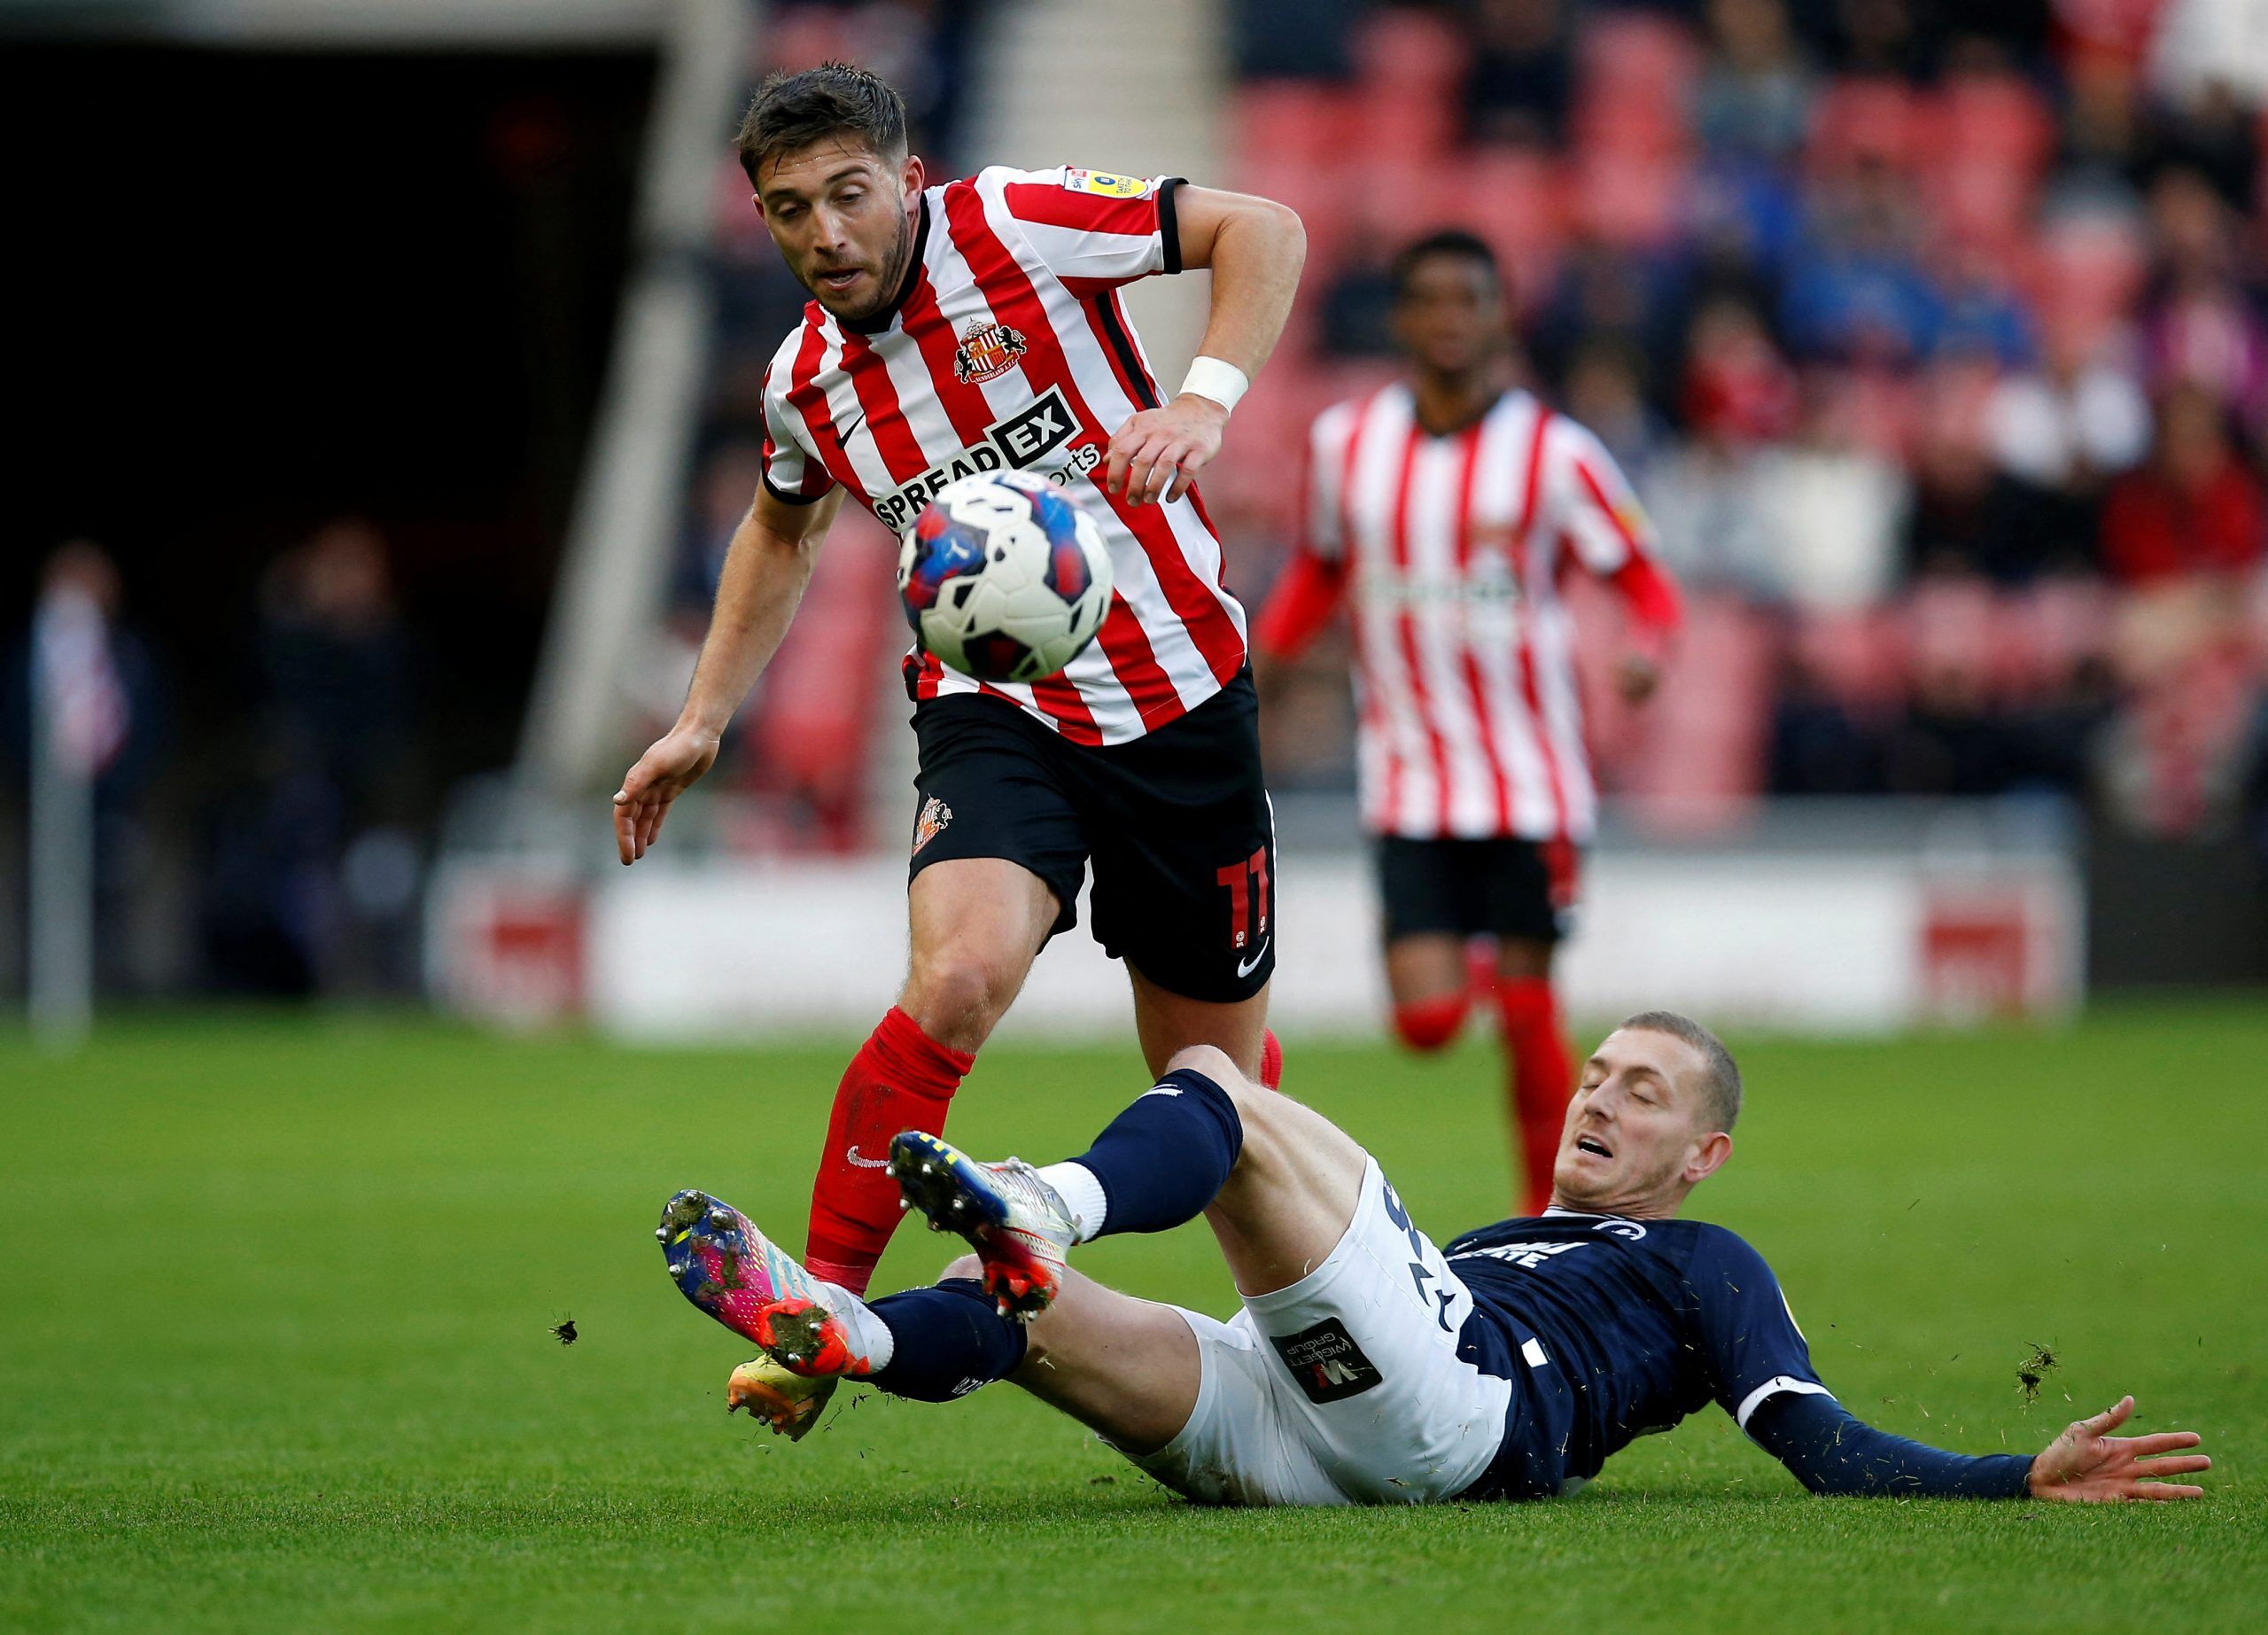 Soccer Football - Championship - Sunderland v Millwall - Stadium of Light, Sunderland, Britain - December 3, 2022  Millwall's George Saville fouls Sunderland's Lynden Gooch before being shown a yellow card Action Images/Craig Brough  EDITORIAL USE ONLY. No use with unauthorized audio, video, data, fixture lists, club/league logos or 